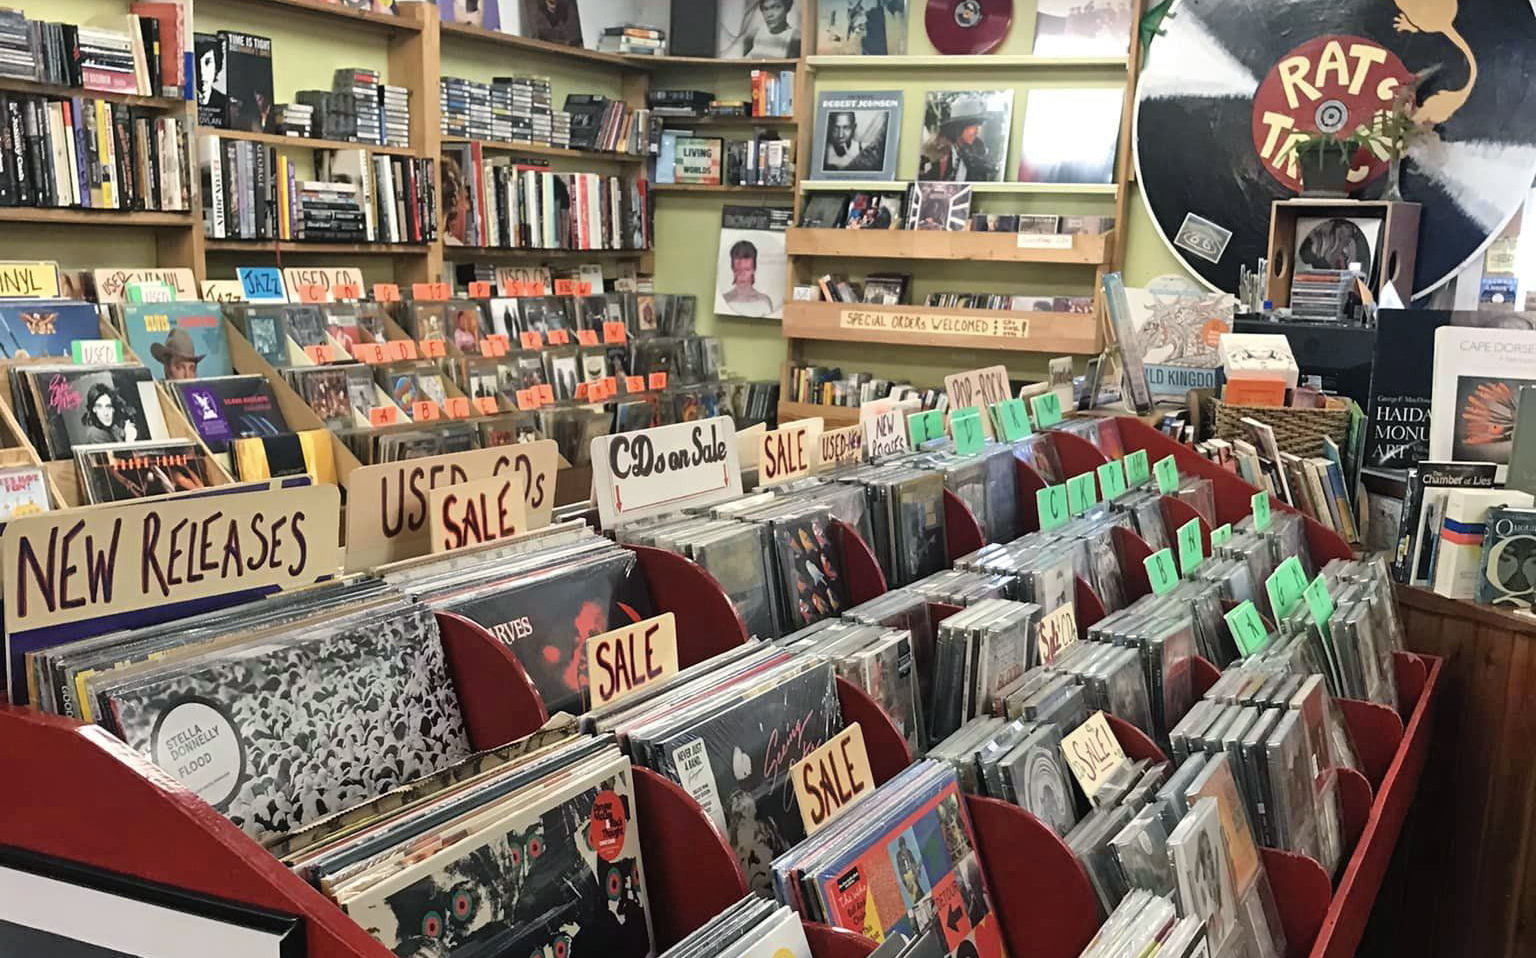 The interior of Packrat Annie’s, showing shelves of books and vinyl records on display 